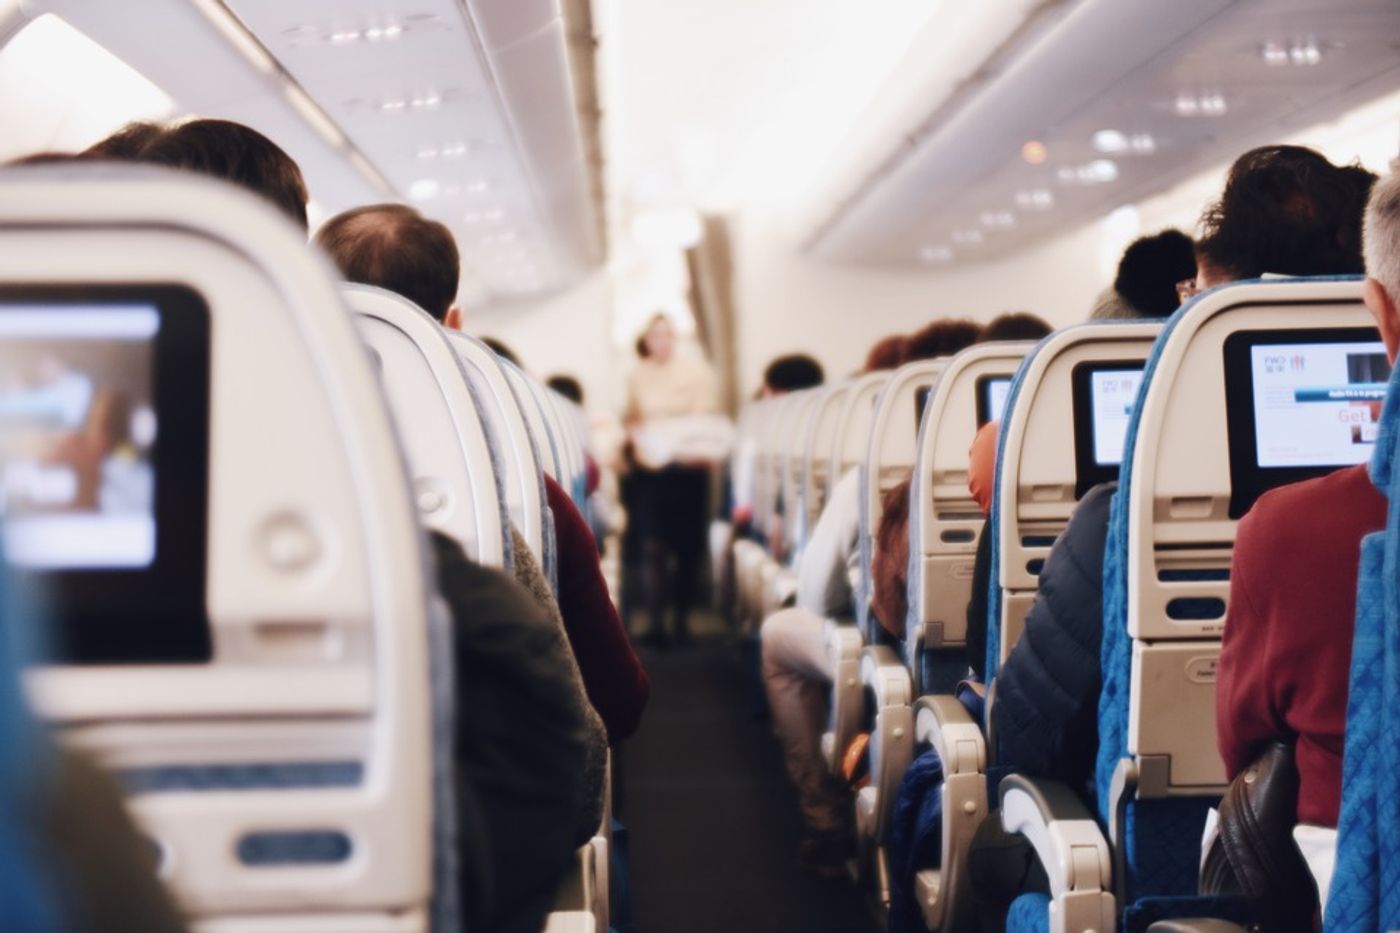 Researchers estimate that there is an in-flight medical emergency per every 604 flights.